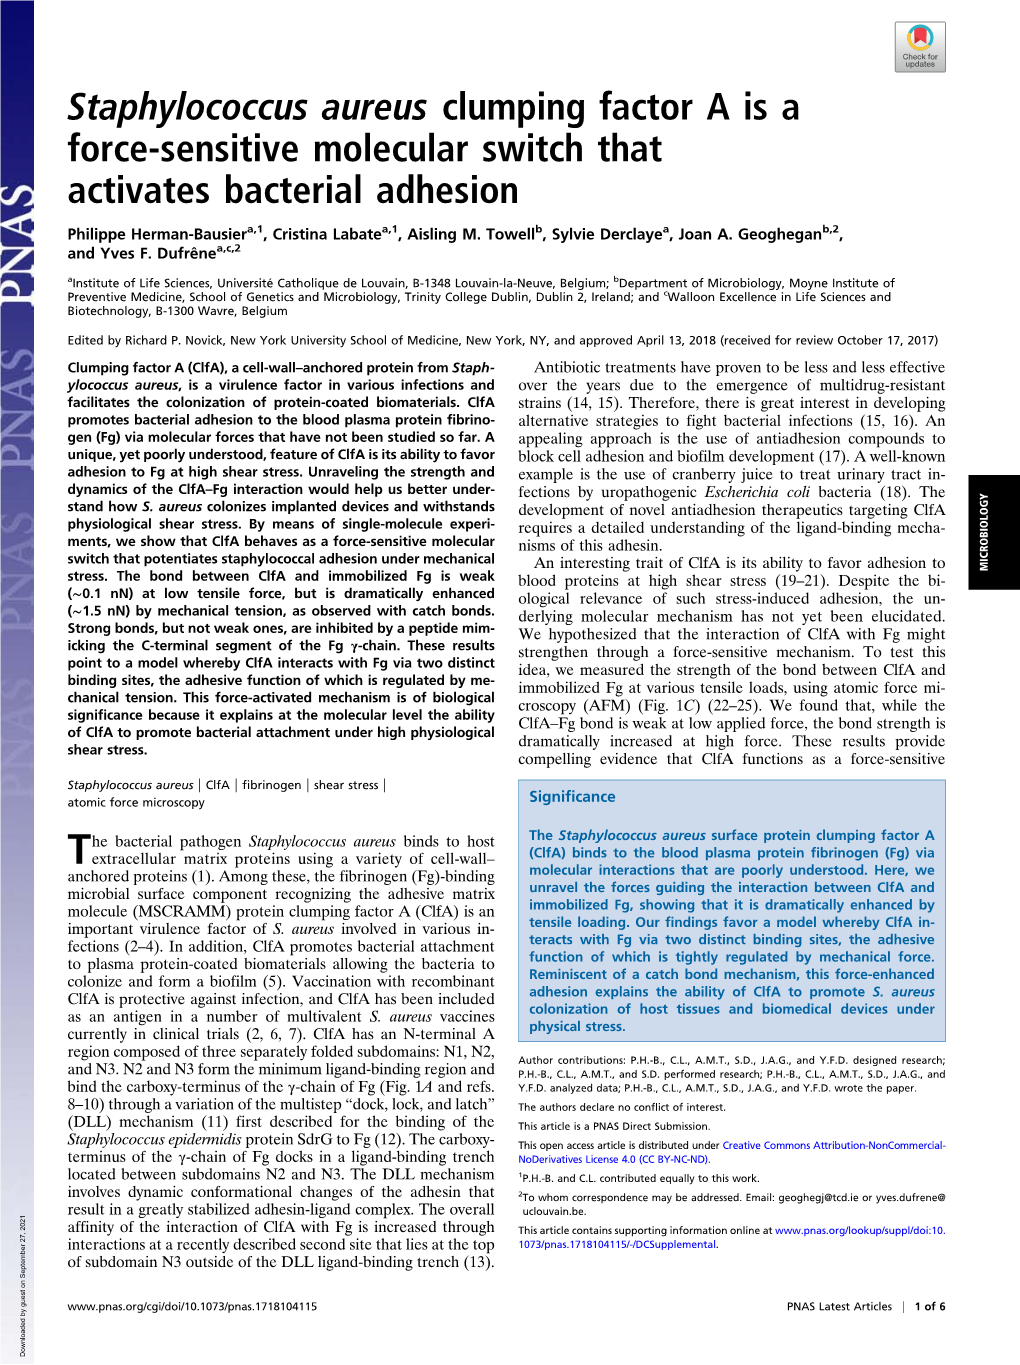 Staphylococcus Aureus Clumping Factor a Is a Force-Sensitive Molecular Switch That Activates Bacterial Adhesion